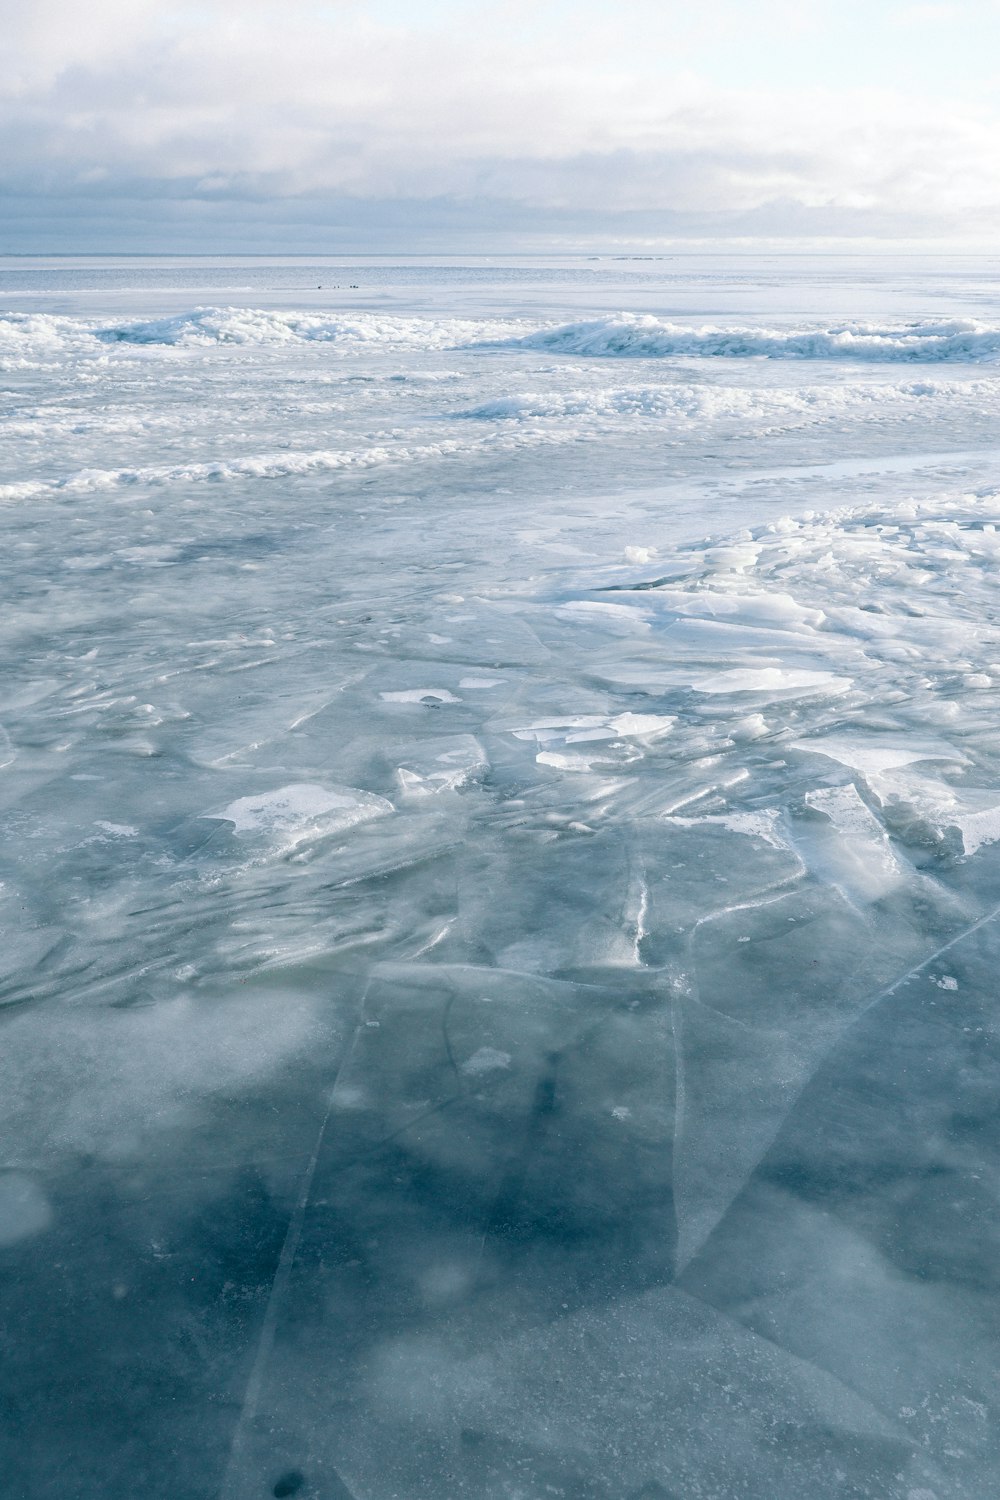 a large expanse of ice floating on top of a body of water